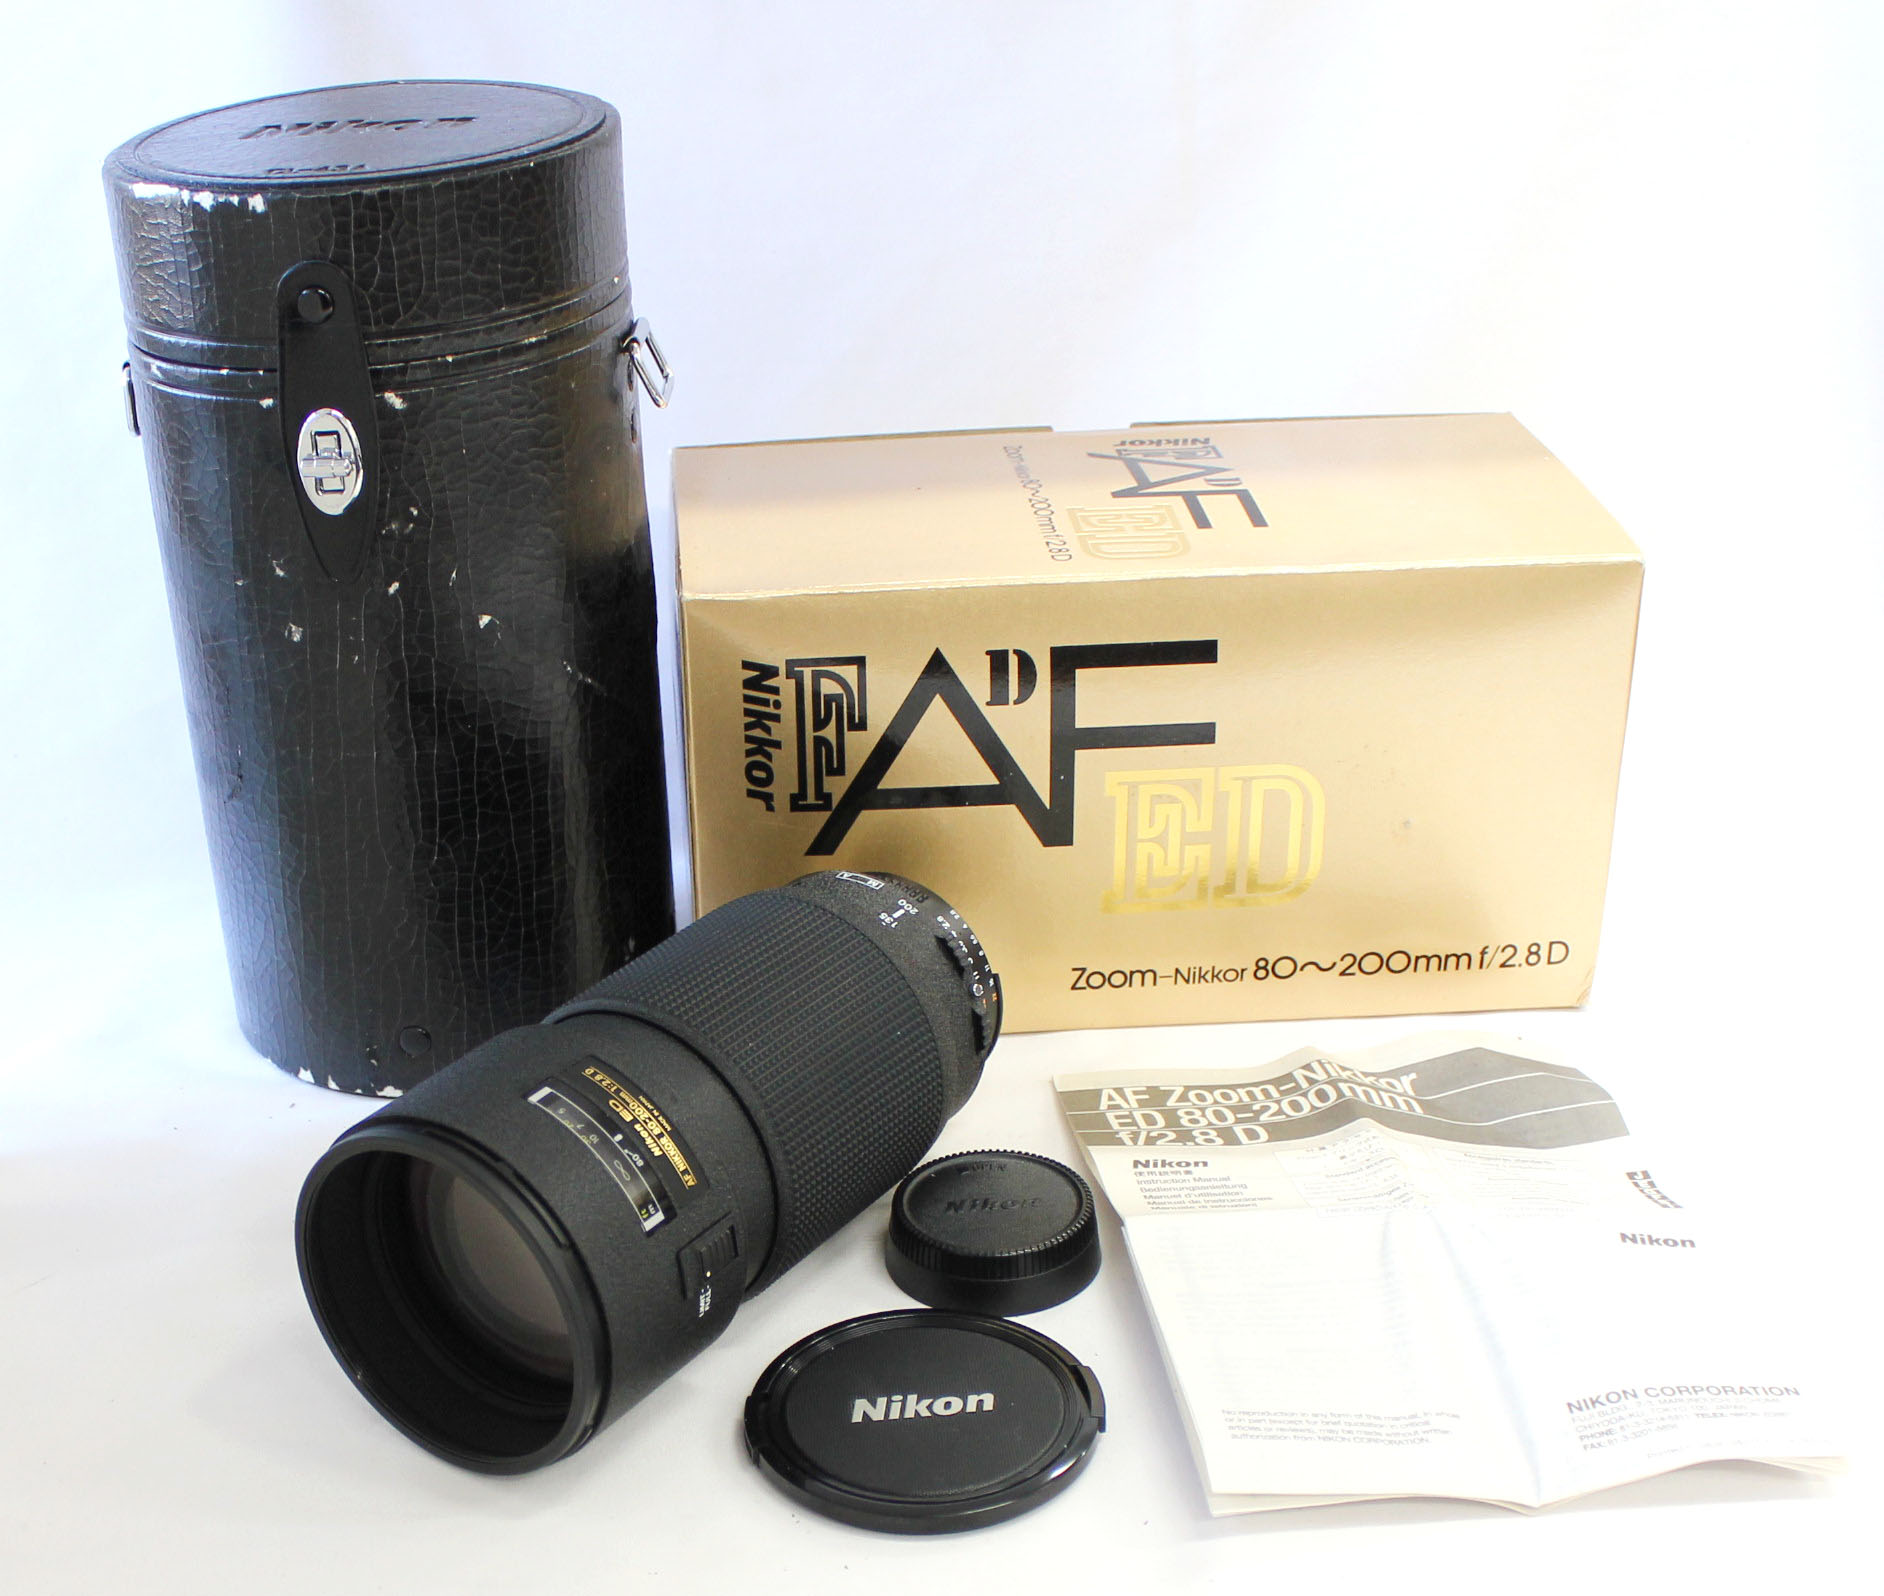 Japan Used Camera Shop | [Near Mint] Nikon ED AF NIKKOR 80-200mm F/2.8 D Zoom Lens II with Case and Box from Japan